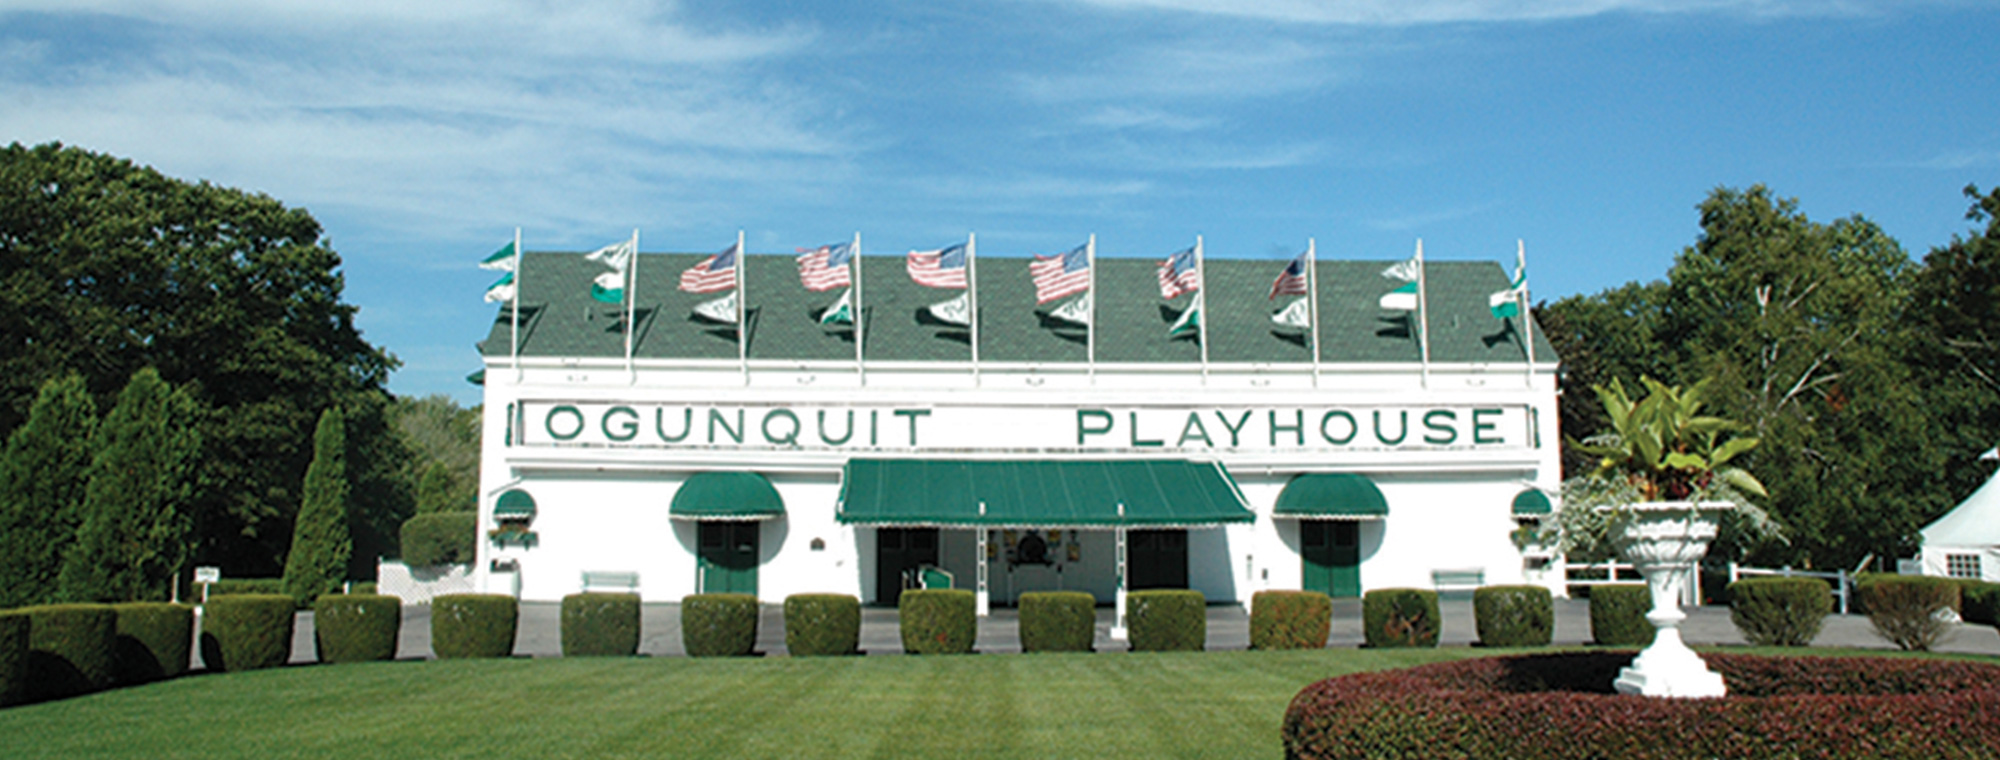 Entrance to Ogunquit Playhouse with flags hanging about building entrance in front of mowed lawn in Ogunquit, ME